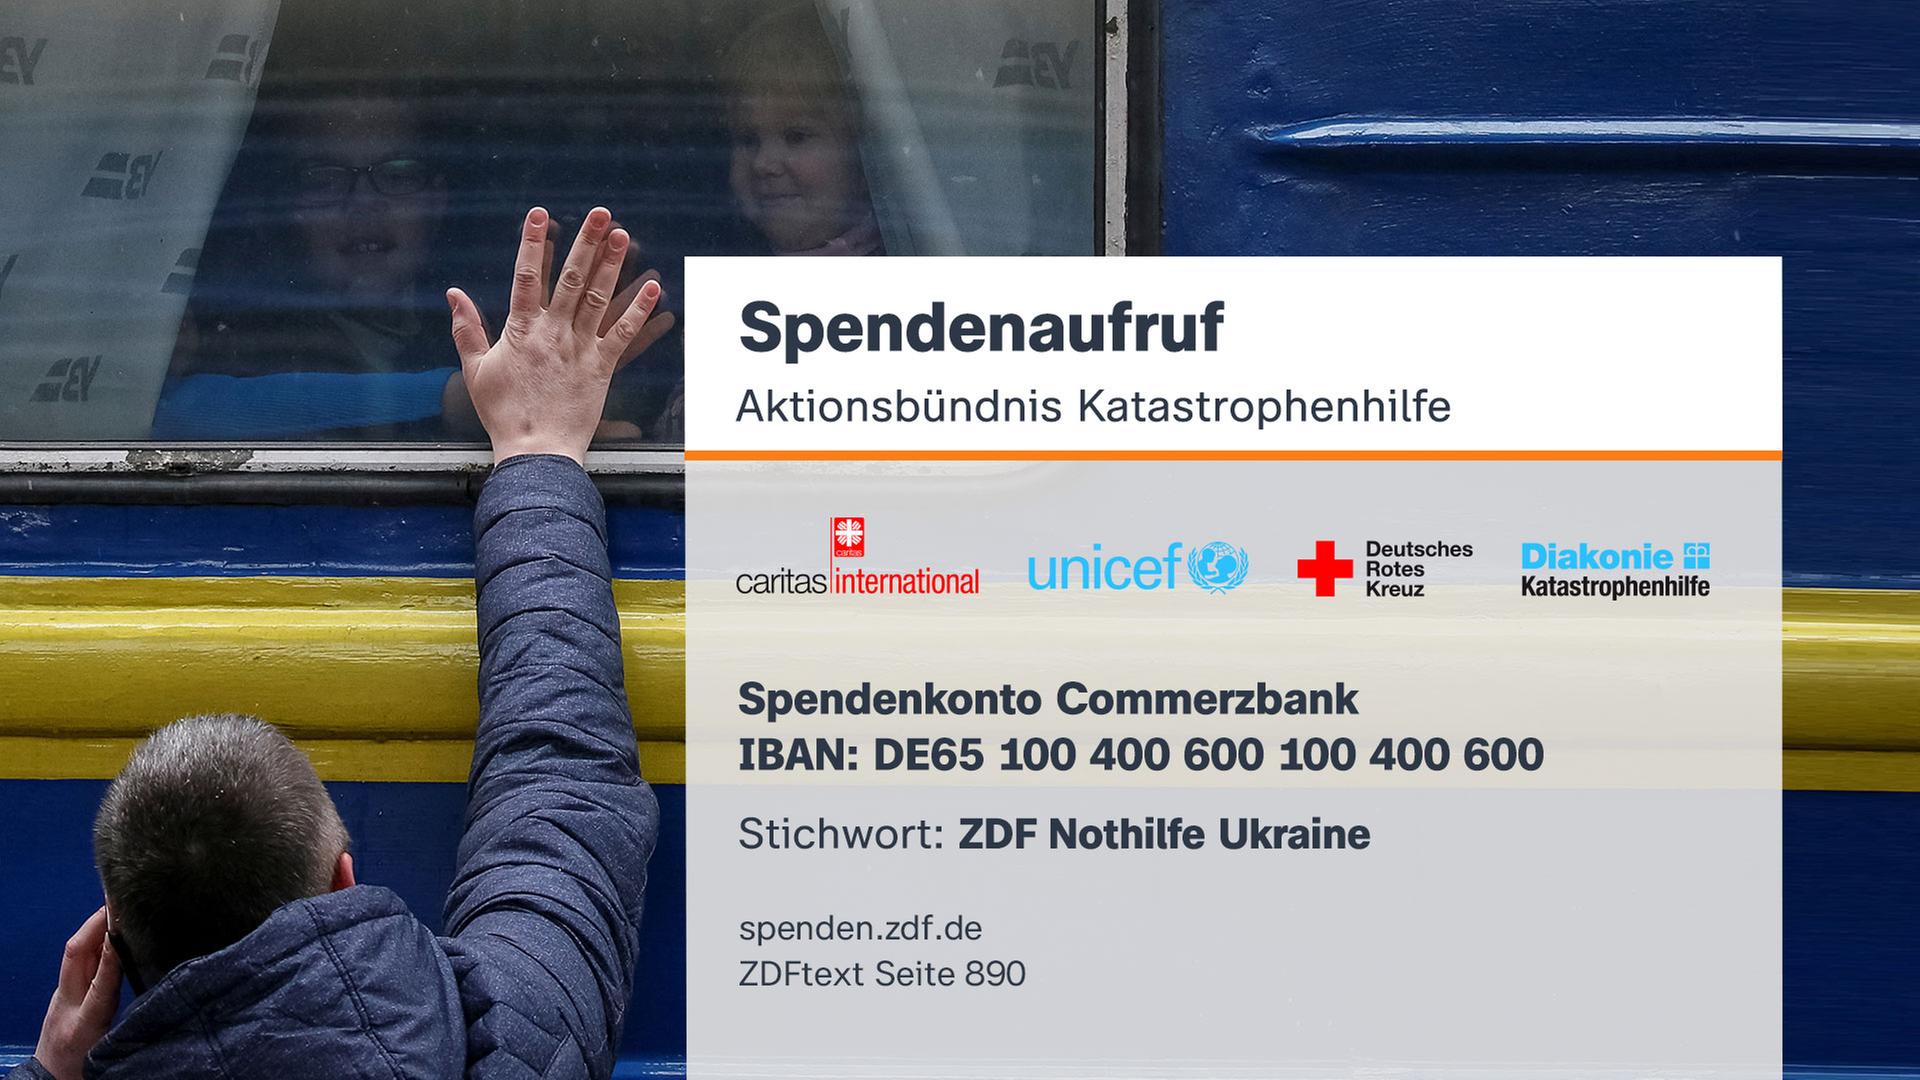 "Call for Donations: Alliance for Action for Disaster Relief | Donation account: Commerzbank | IBAN: DE65 100 400 600 100 400 600 | BIC: COBADEFFXXX | Keyword: ZDF Nothilfe Ukraine"